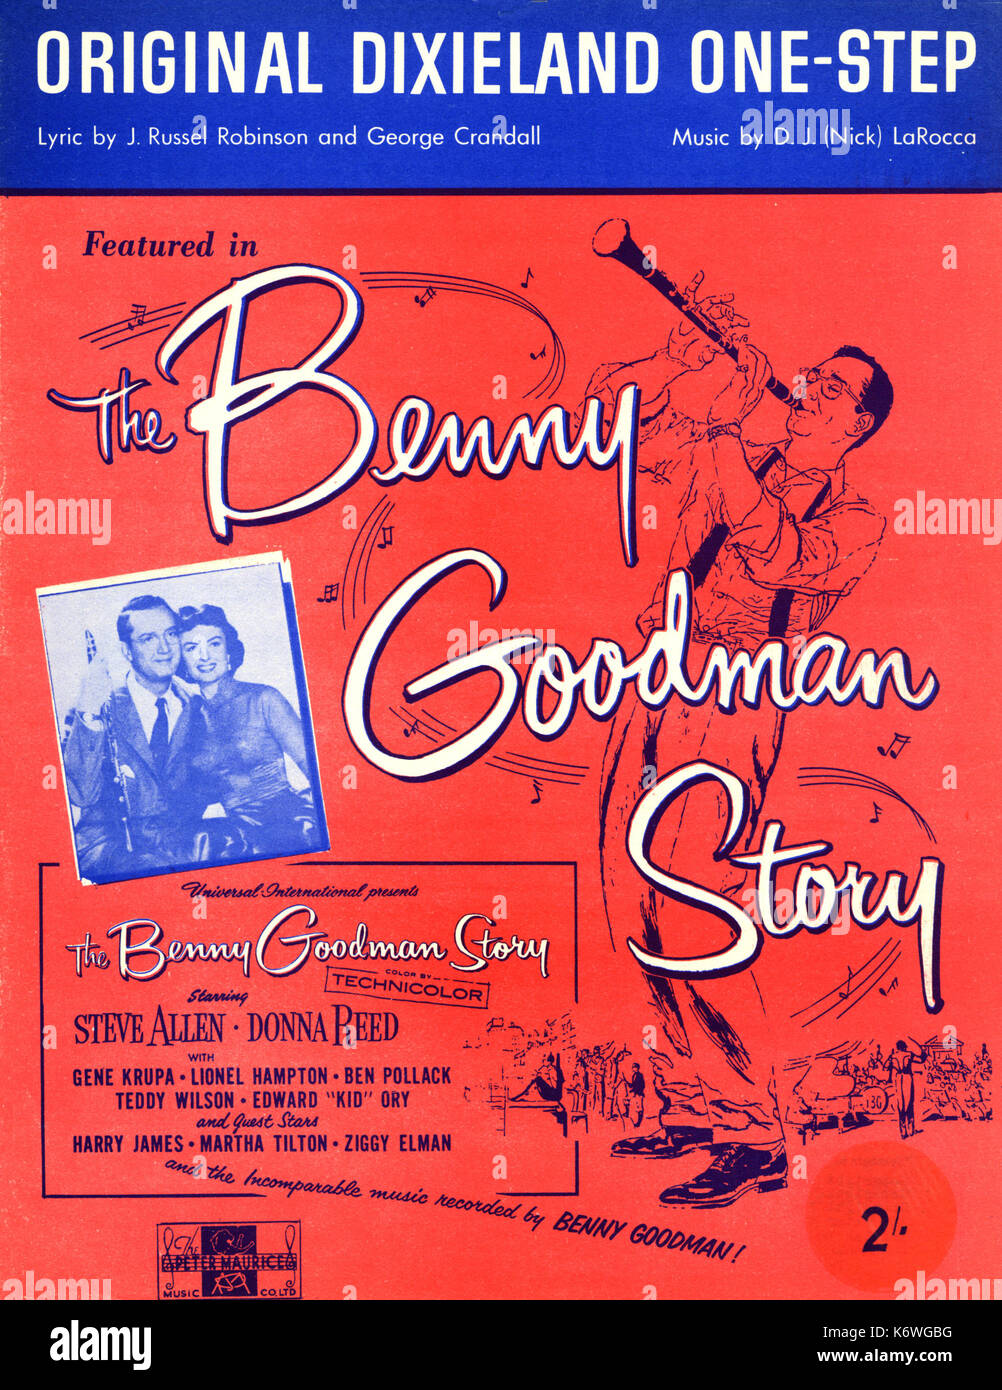 Benny Goodman music score cover of 'Original Dixieland One-Step' which featured in the film 'The Benny Goodman Story'. Lyrics by J. Russel Robinson, music byD.J. (Nick) LaRocca.  American clarinettist & bandleader, 1909-1986. Stock Photo